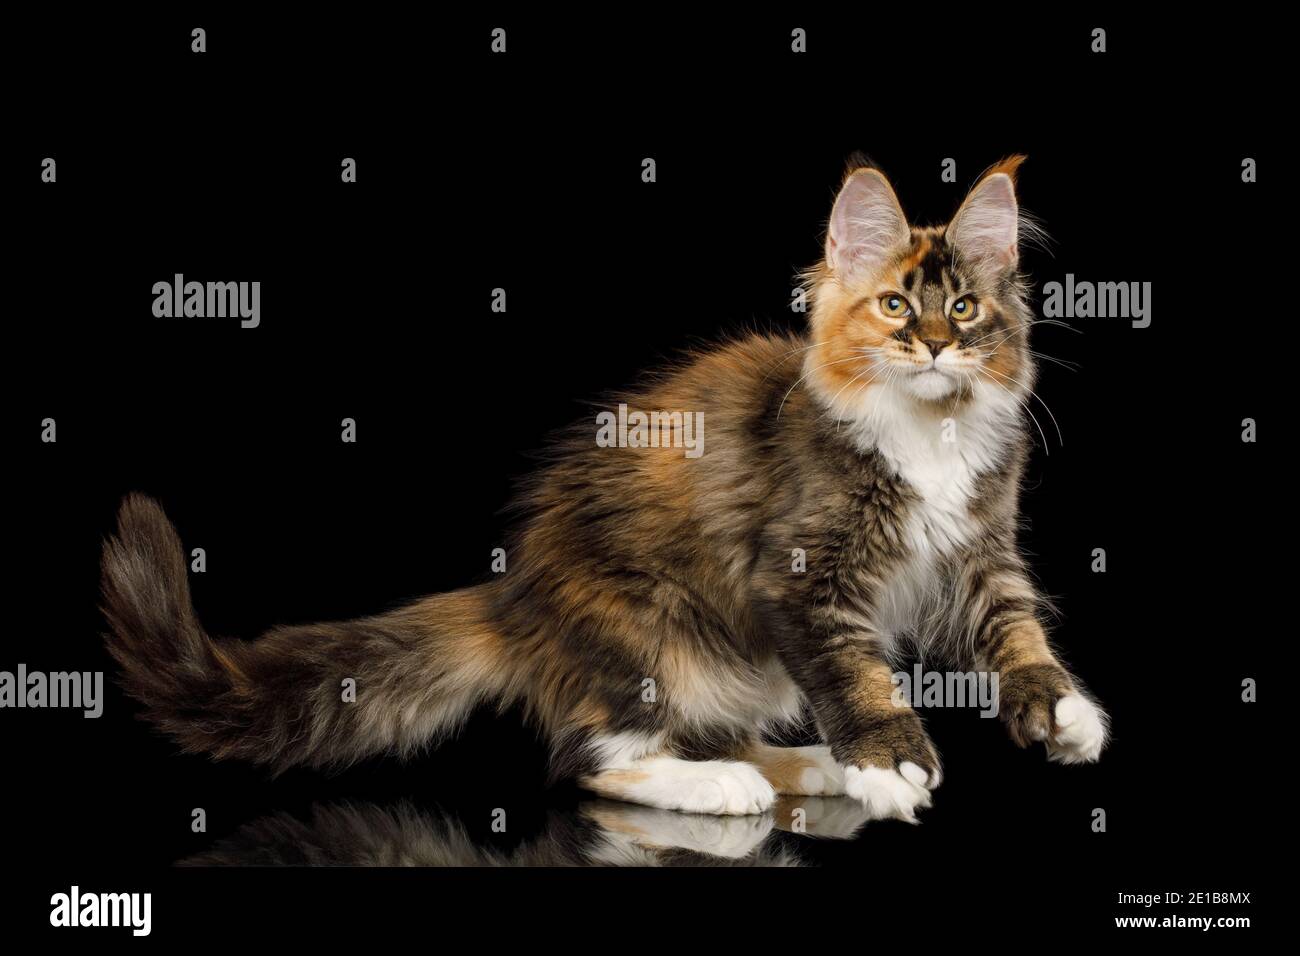 Playful red maine coon cat with polydactyl paws play on Isolated black background Stock Photo